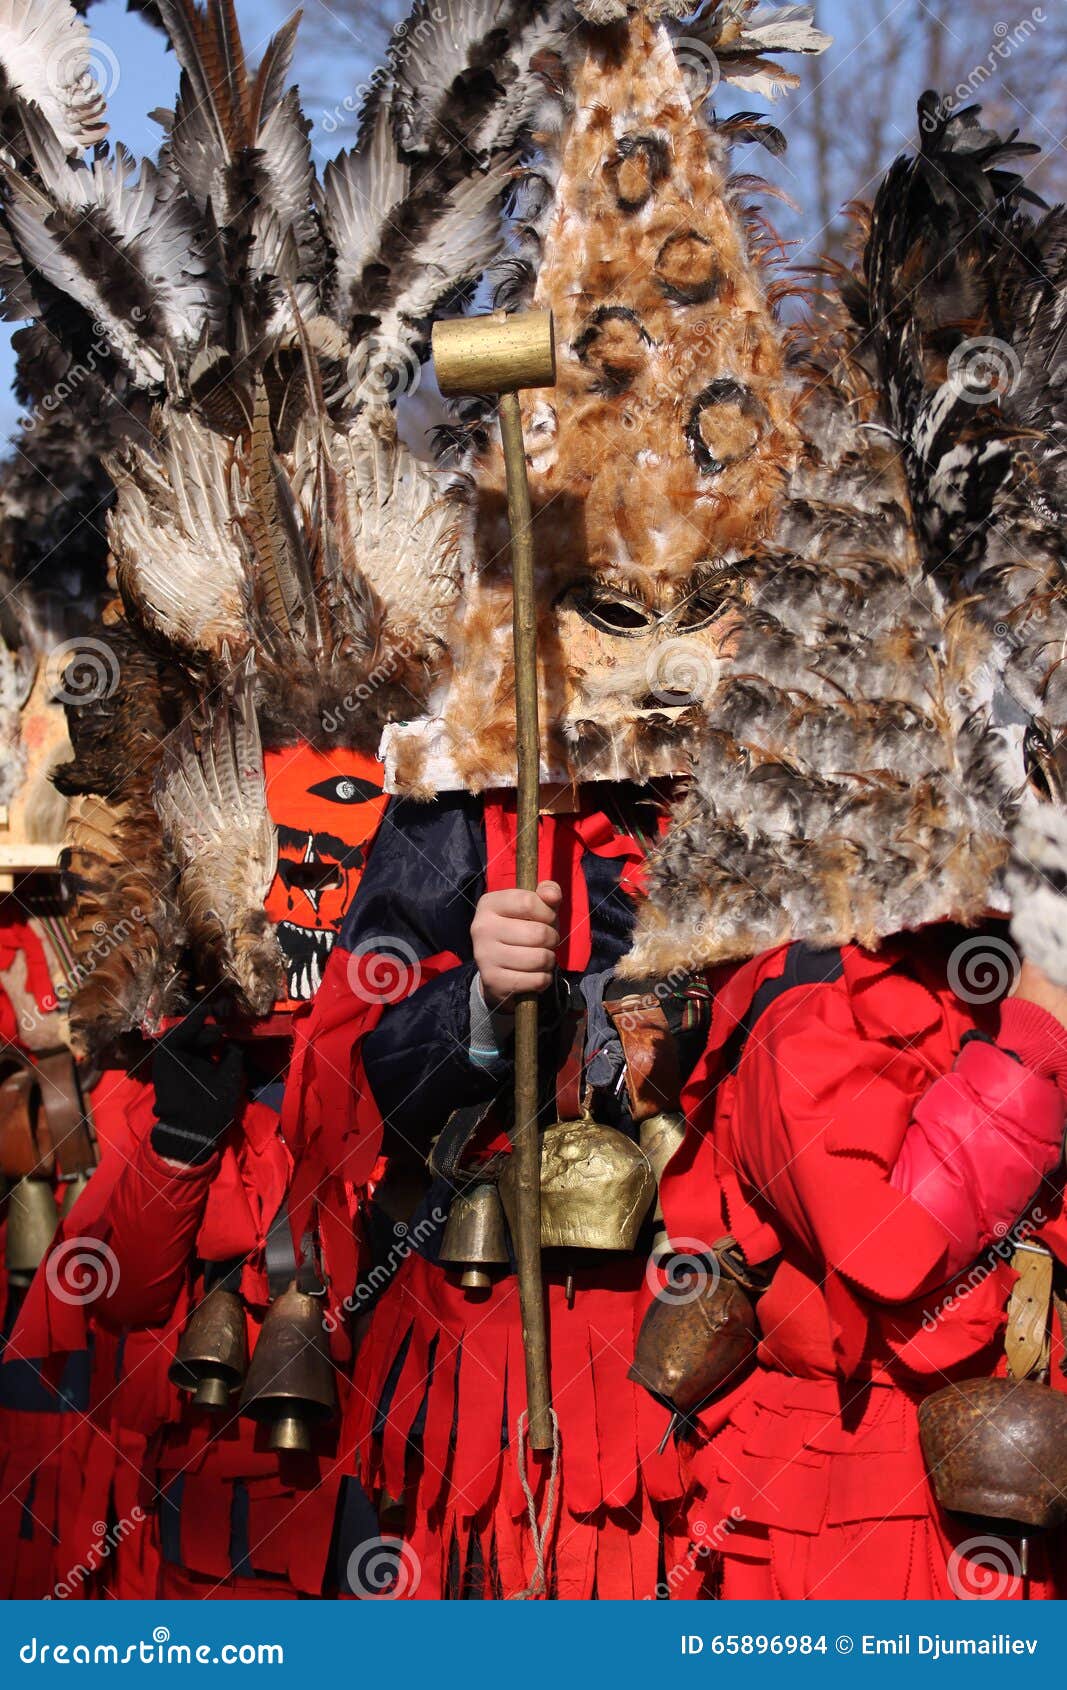 Kuker festival Bulgaria. Pernik, Bulgaria - January 30, 2016: Unidentified boy with traditional Kukeri costume are seen at the Festival of the Masquerade Games Surova in Pernik, Bulgaria. Surva takes place the third weekend of January and it s the biggest event of this type in Bulgaria. Photo taken on: January 30th, 2016